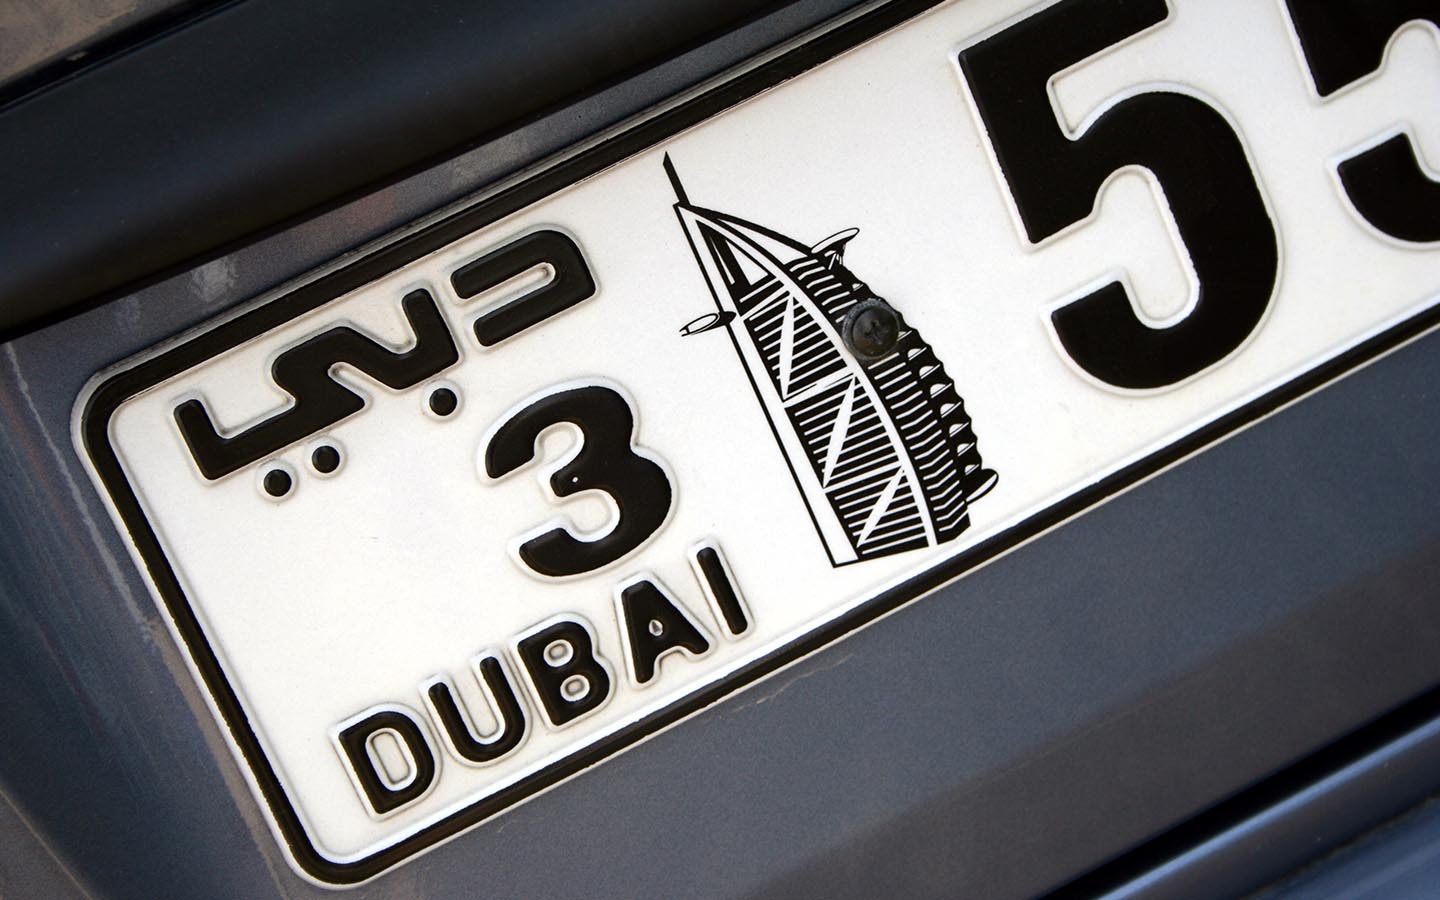 Distinguished plate number ownership in the UAE through MoI